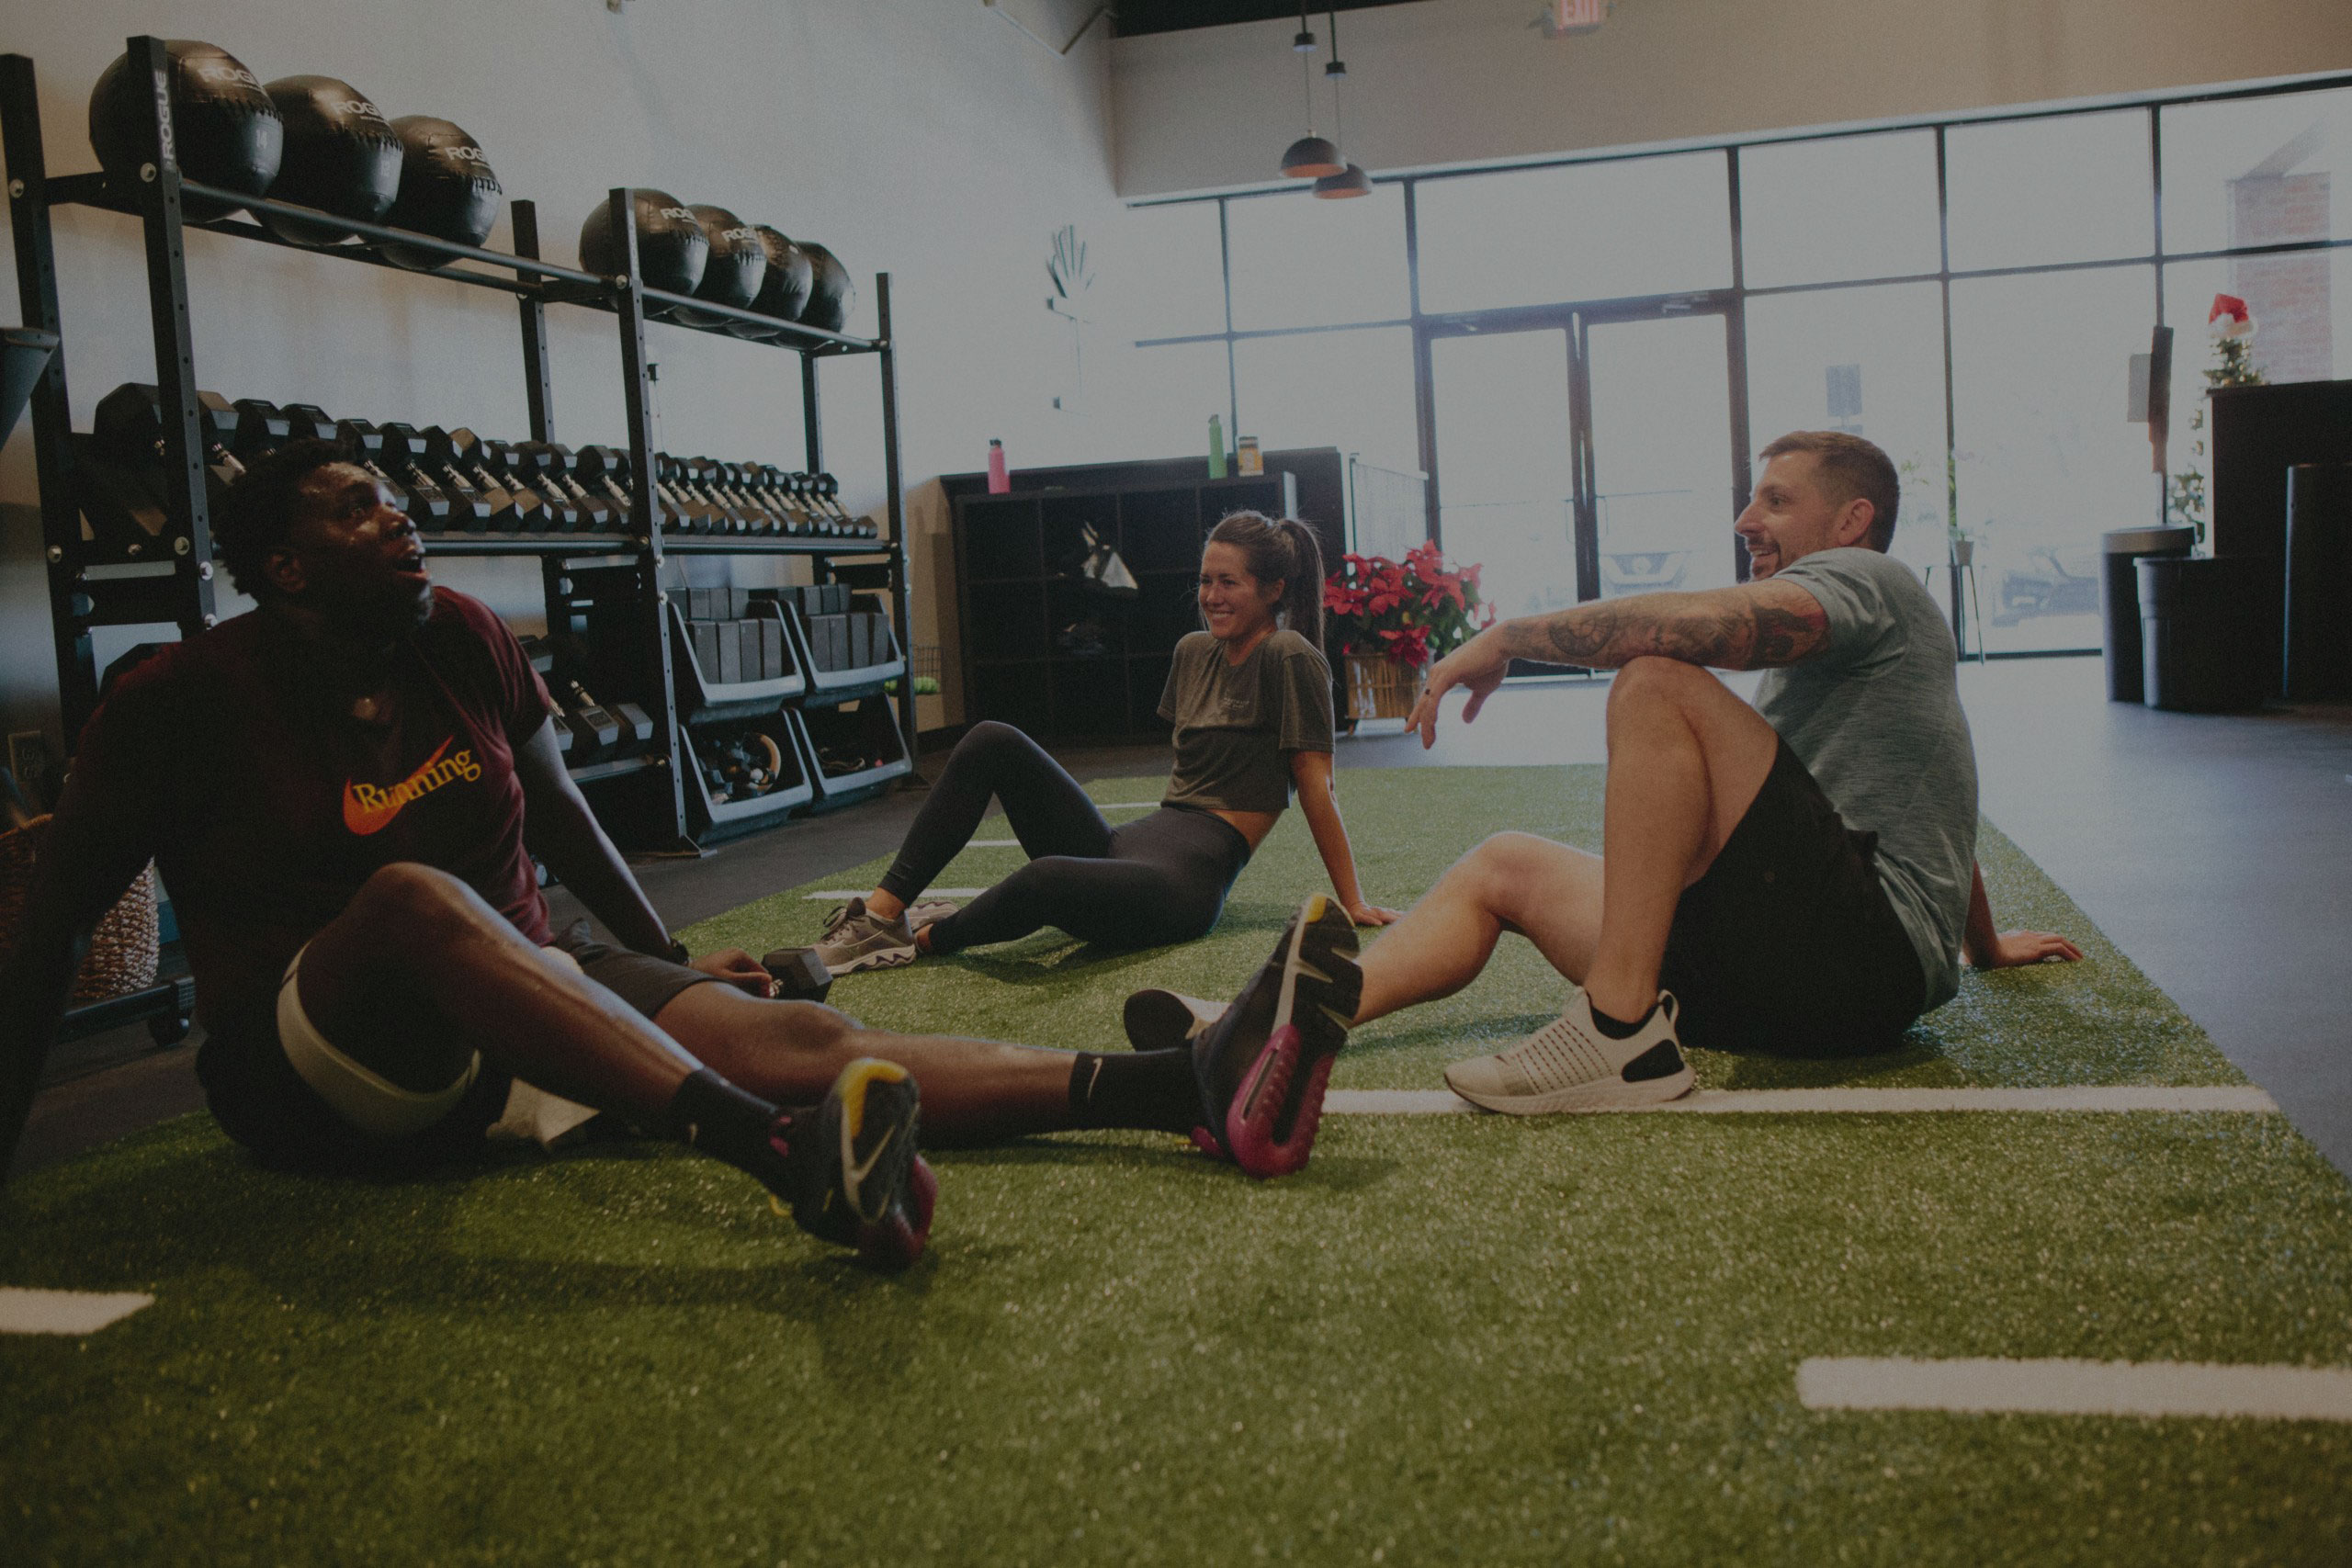 Trainers and Gym Go-ers sit on the artificial turf to catch their breath after a drive class.